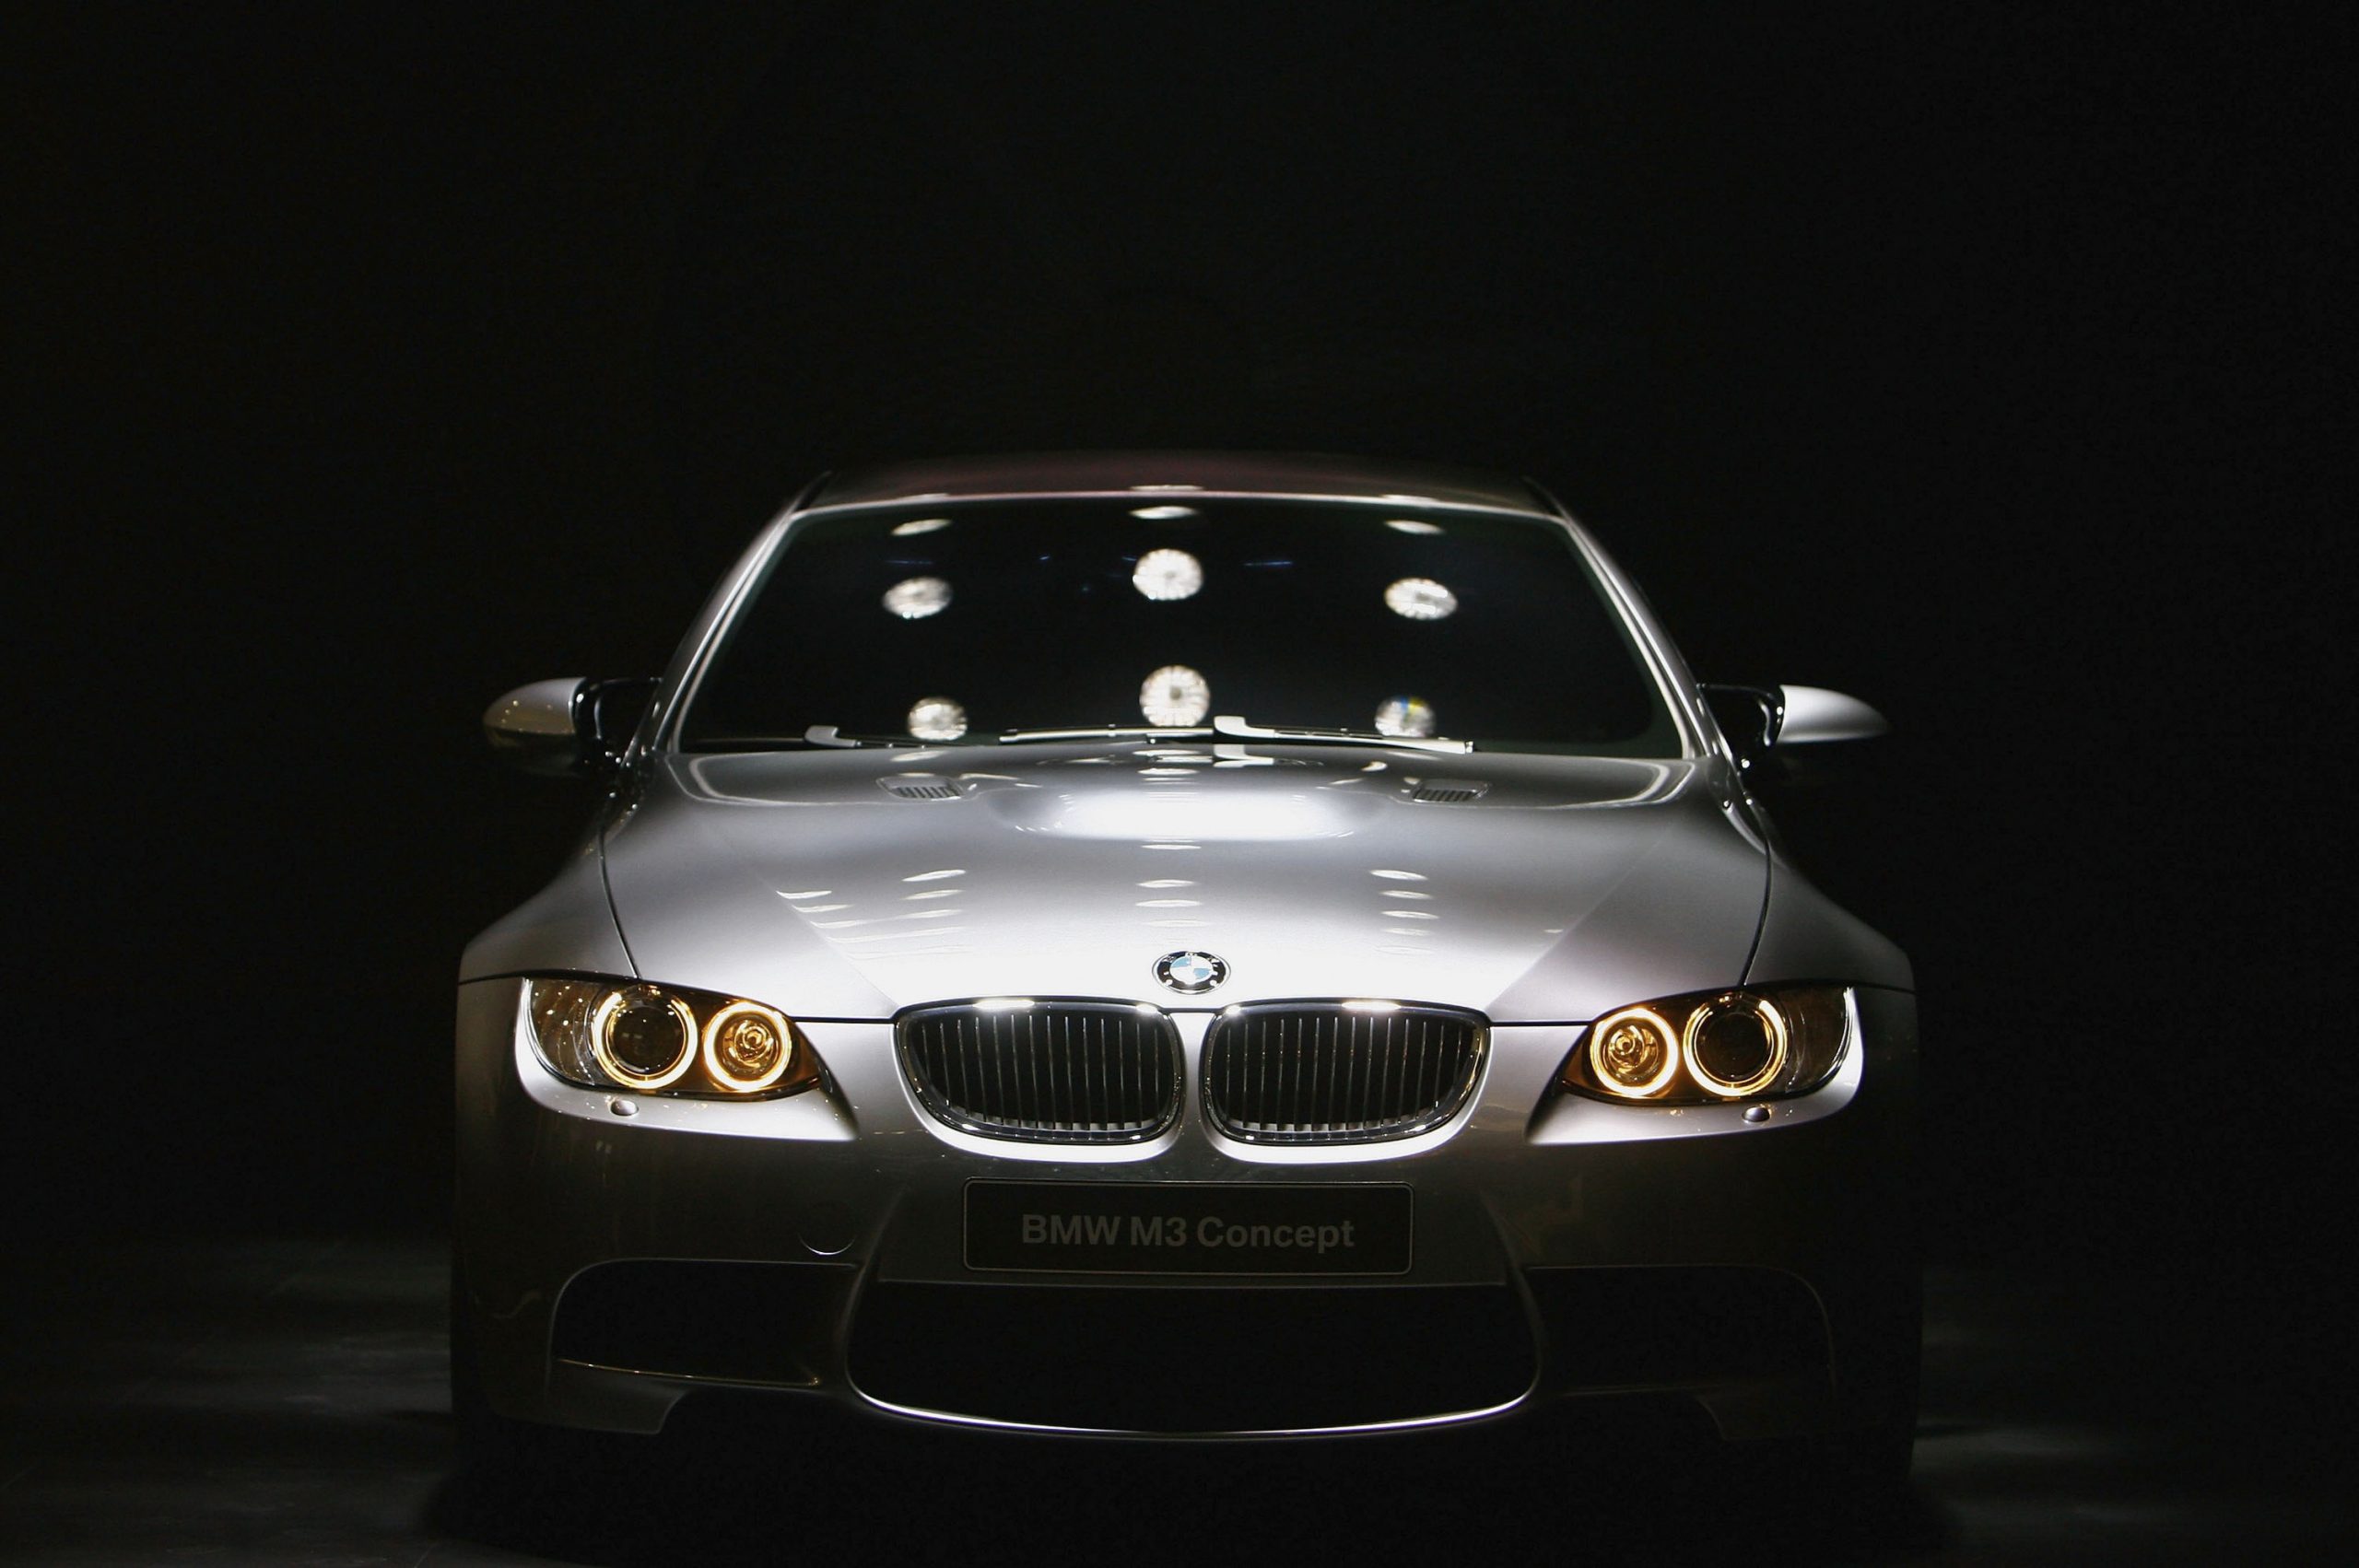 A silver E92 BMW M3 shot from the front surrounded by shadow